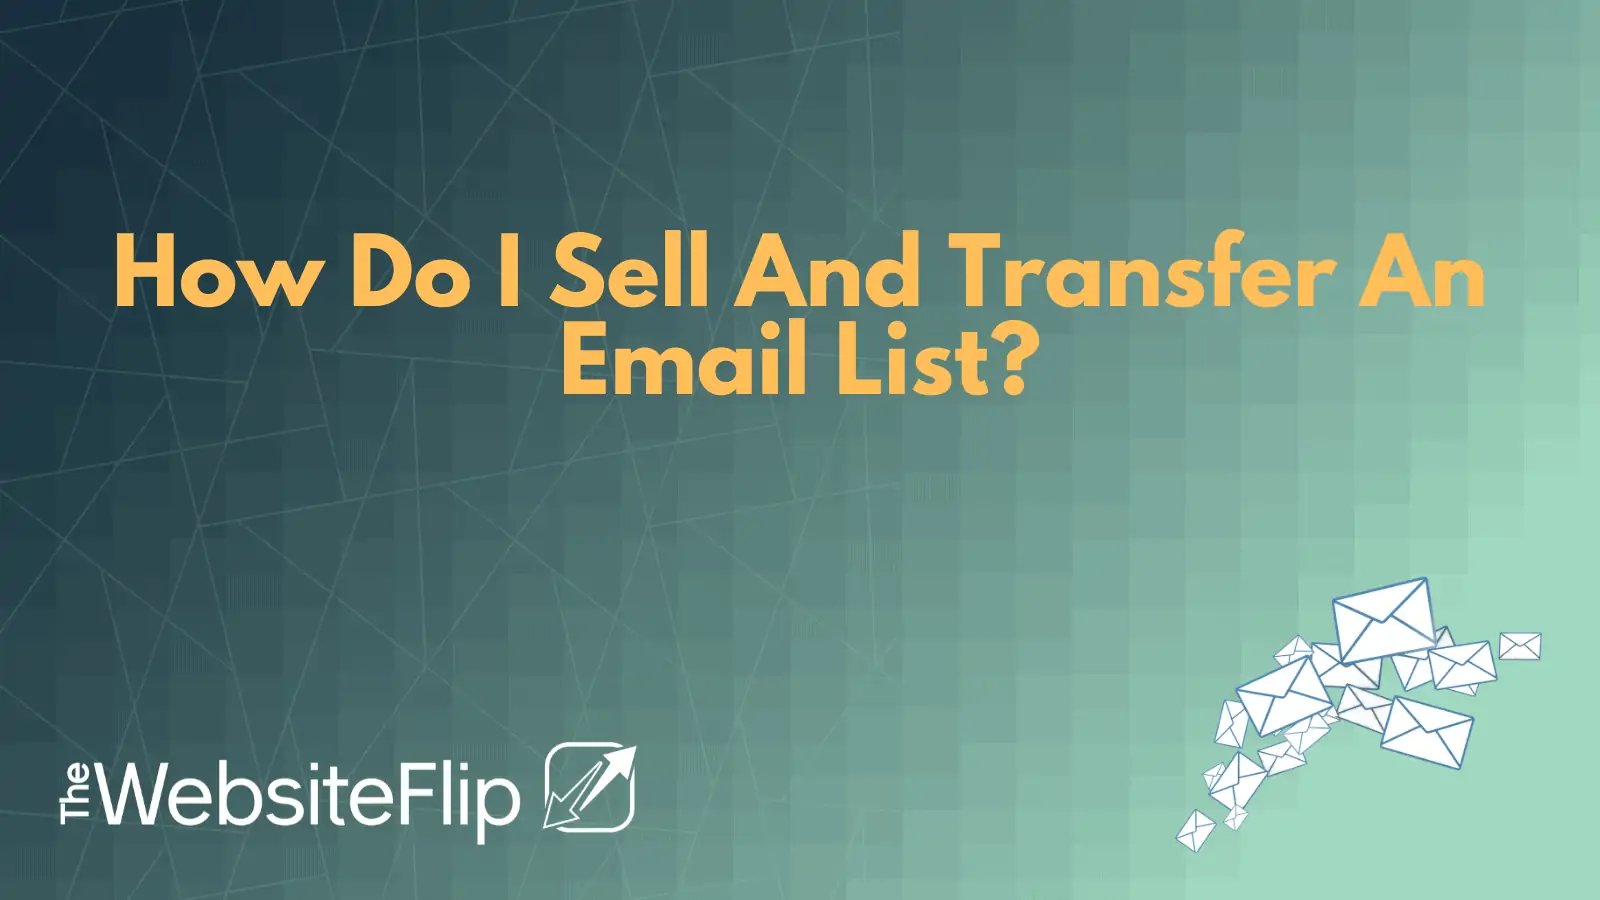 How Do I Sell And Transfer An Email List